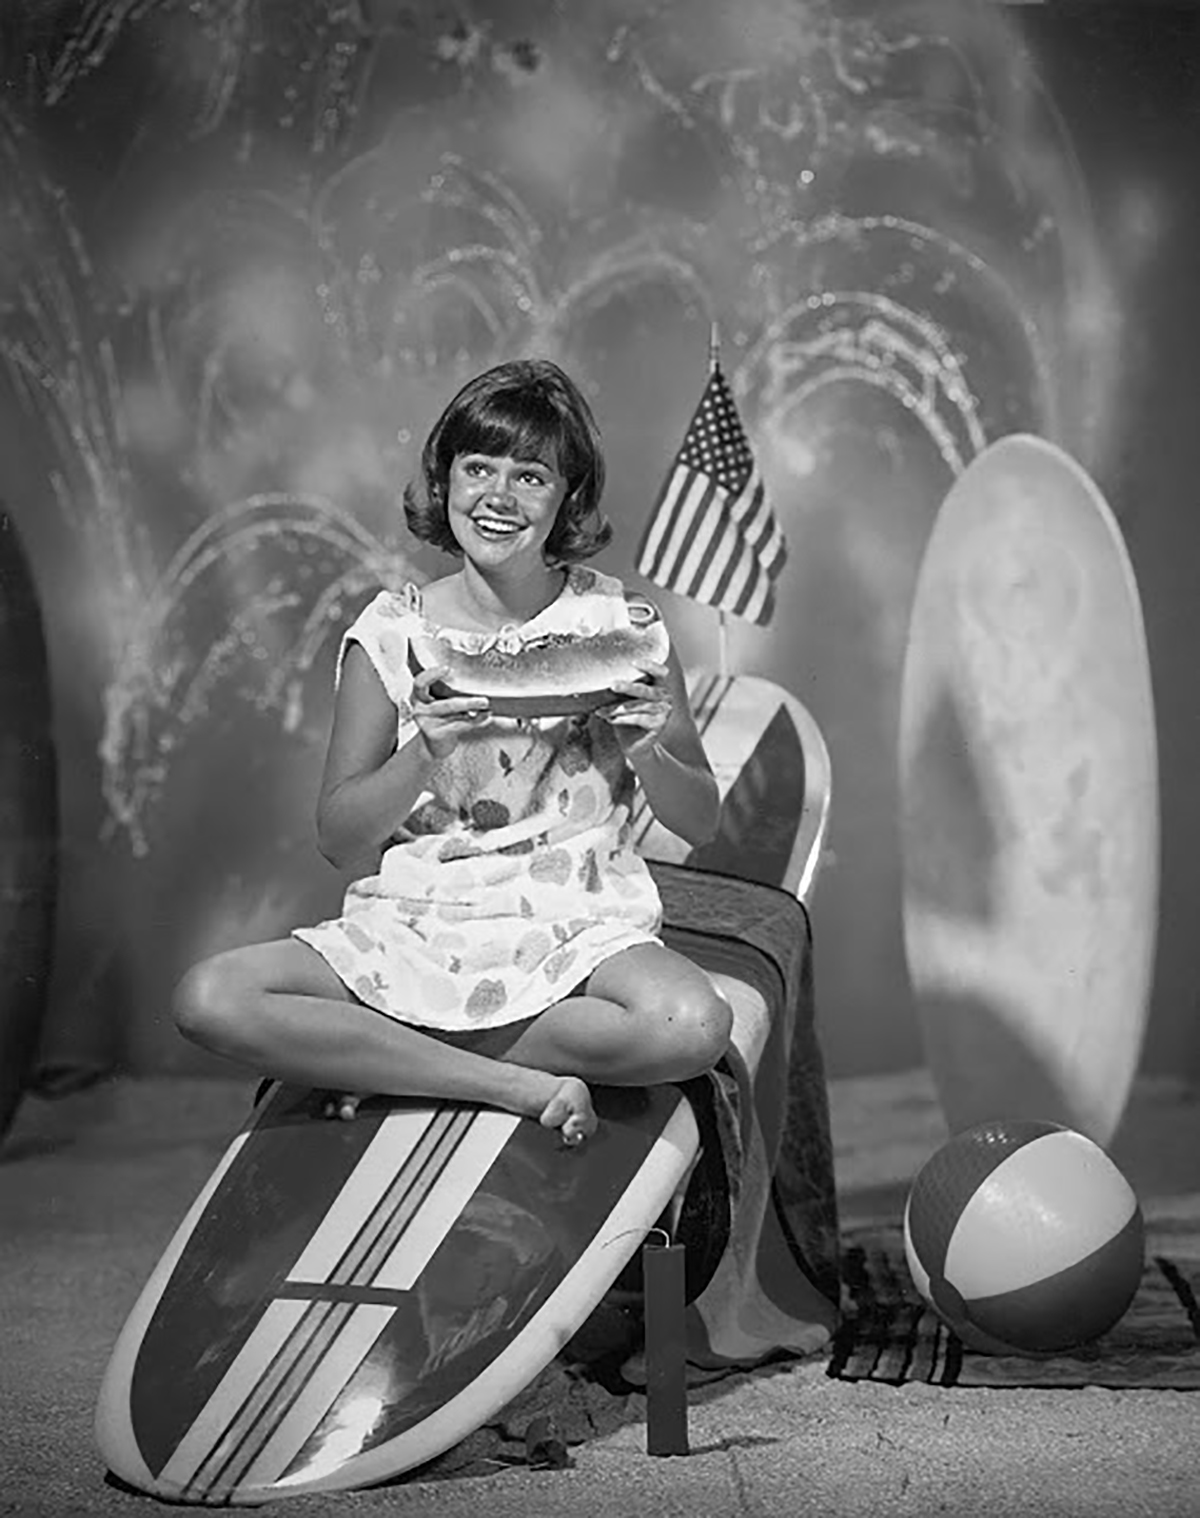 A promotional picture of Sally Field eating watermelon on a surfboard for the show Gidget in 1965.